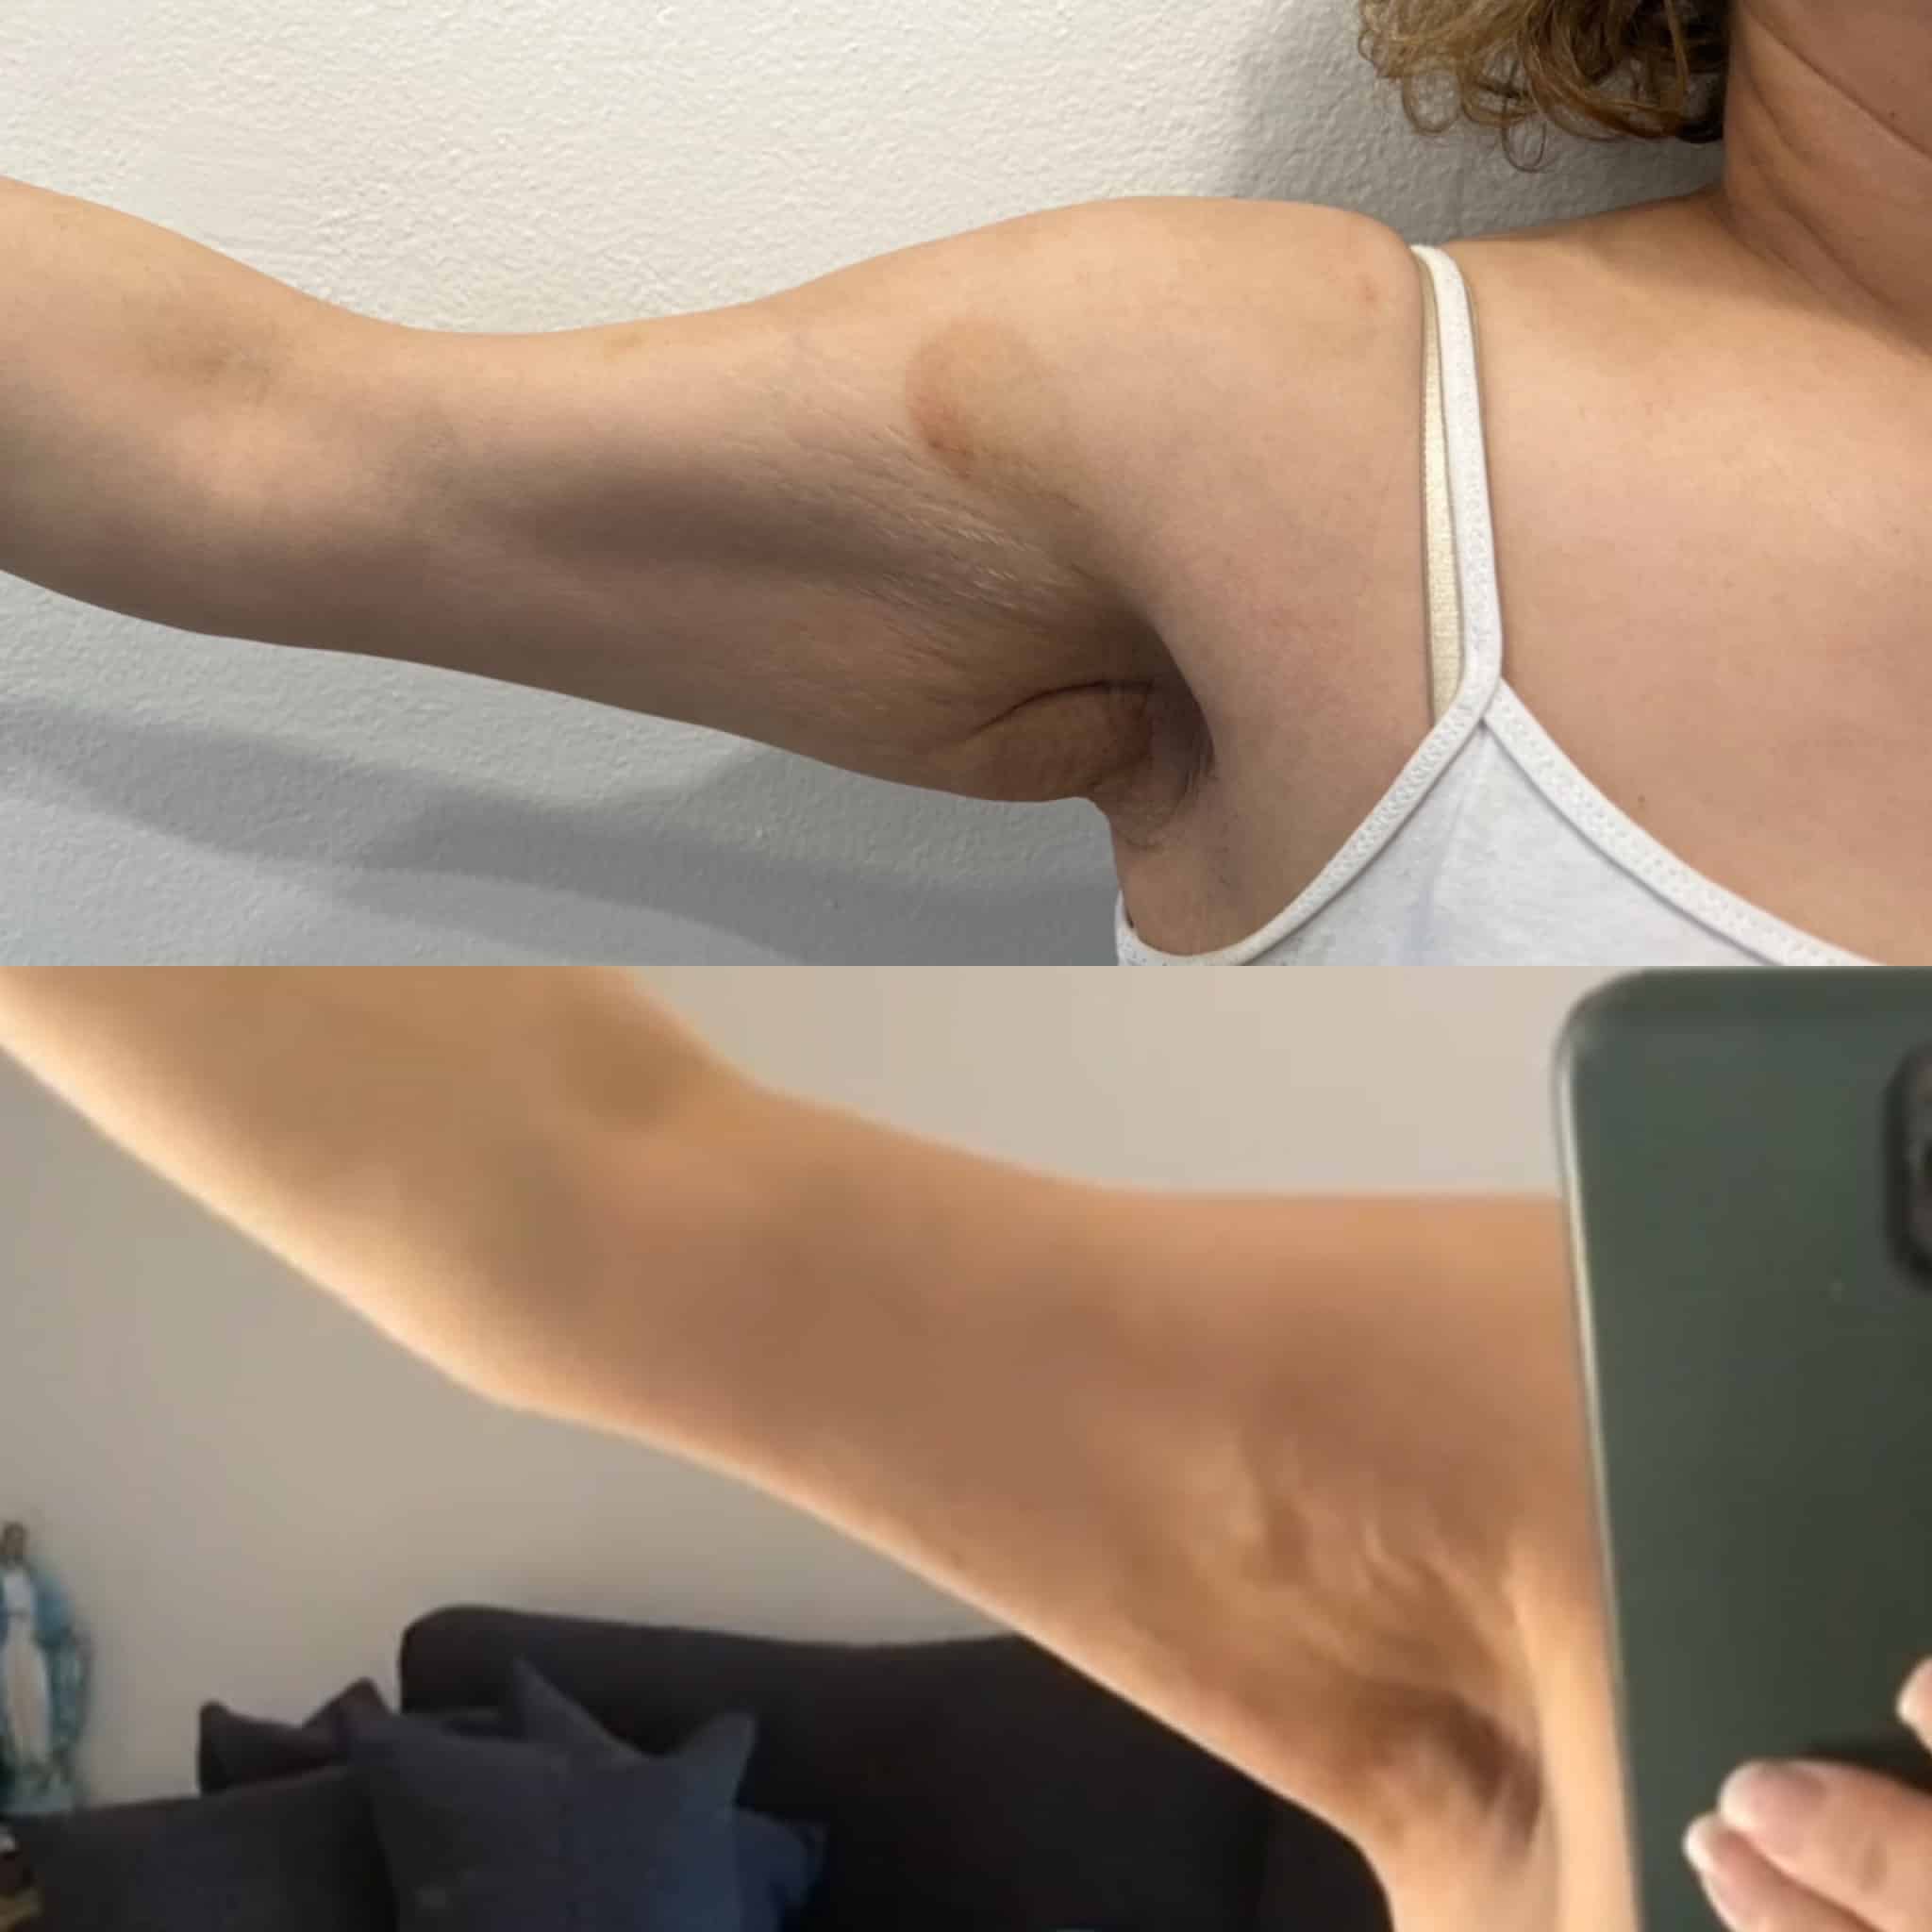 arm transformation after trusculpt id treatment at our skin care clinic parramatta